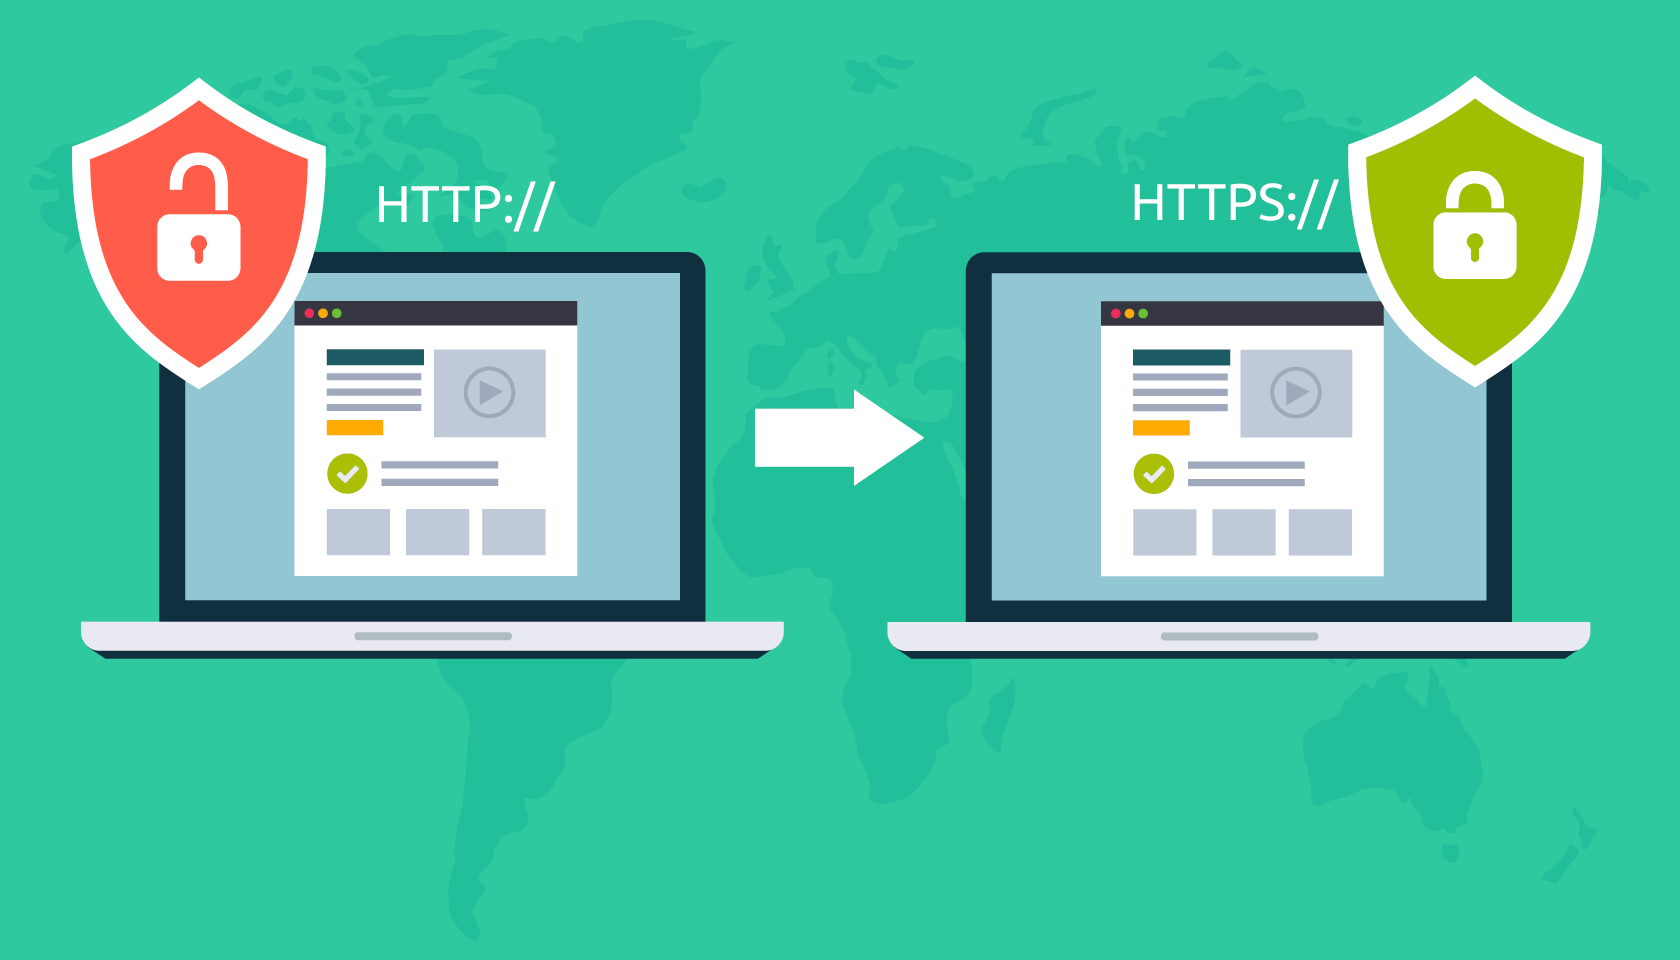 HTTP vs. HTTPS: Chrome is now marking unencrypted websites as NOT SECURE